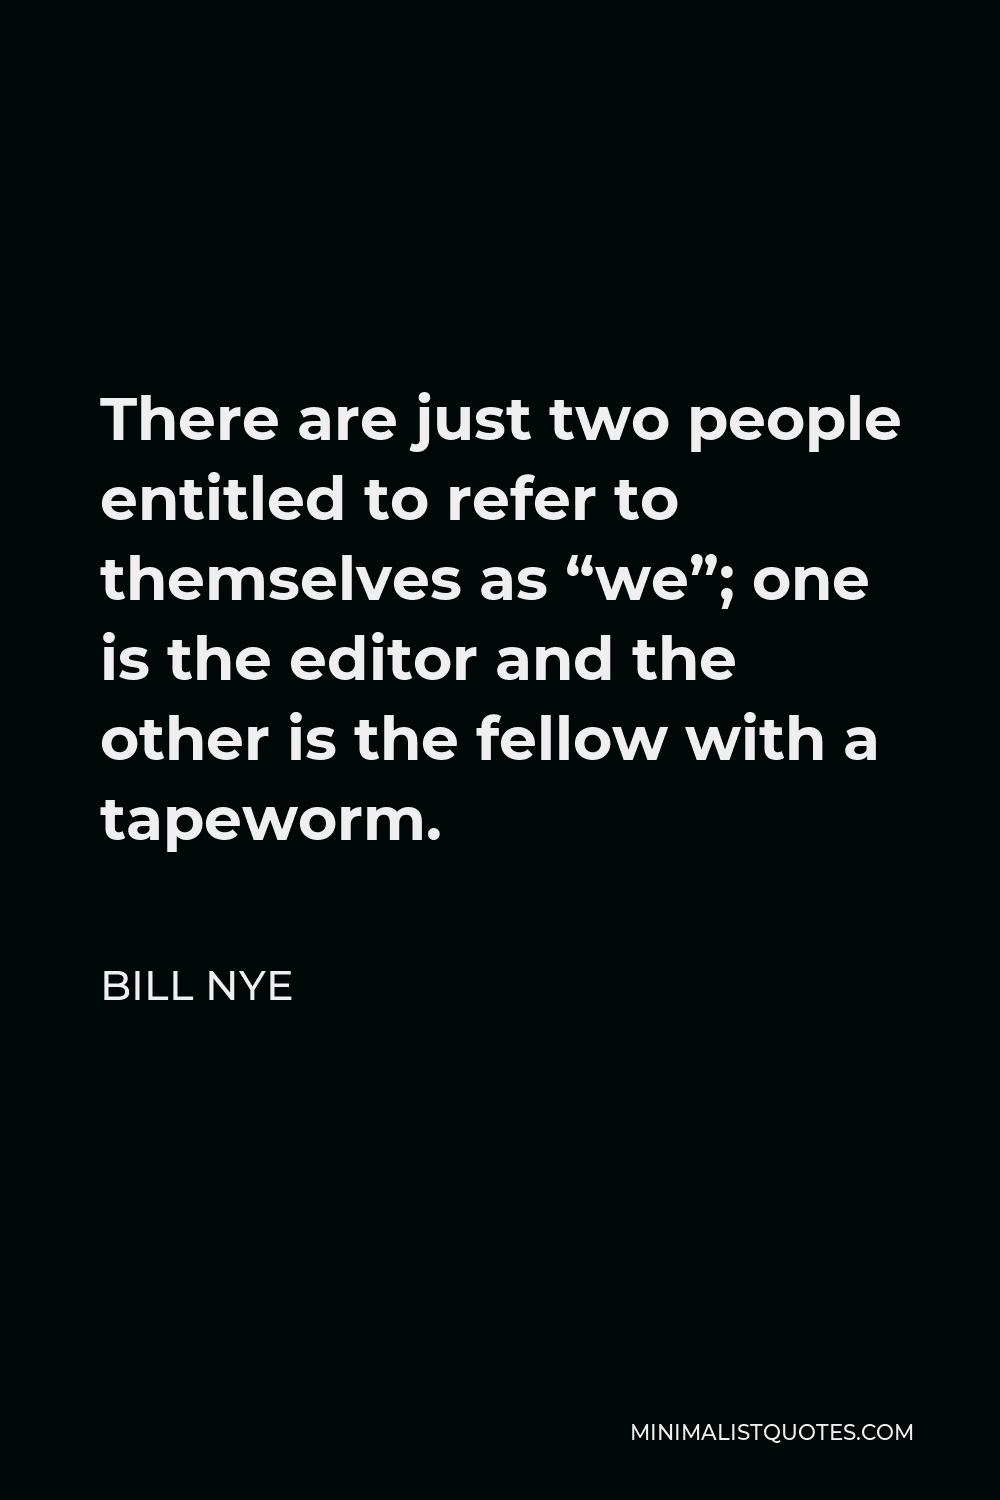 Bill Nye Quote - There are just two people entitled to refer to themselves as “we”; one is the editor and the other is the fellow with a tapeworm.